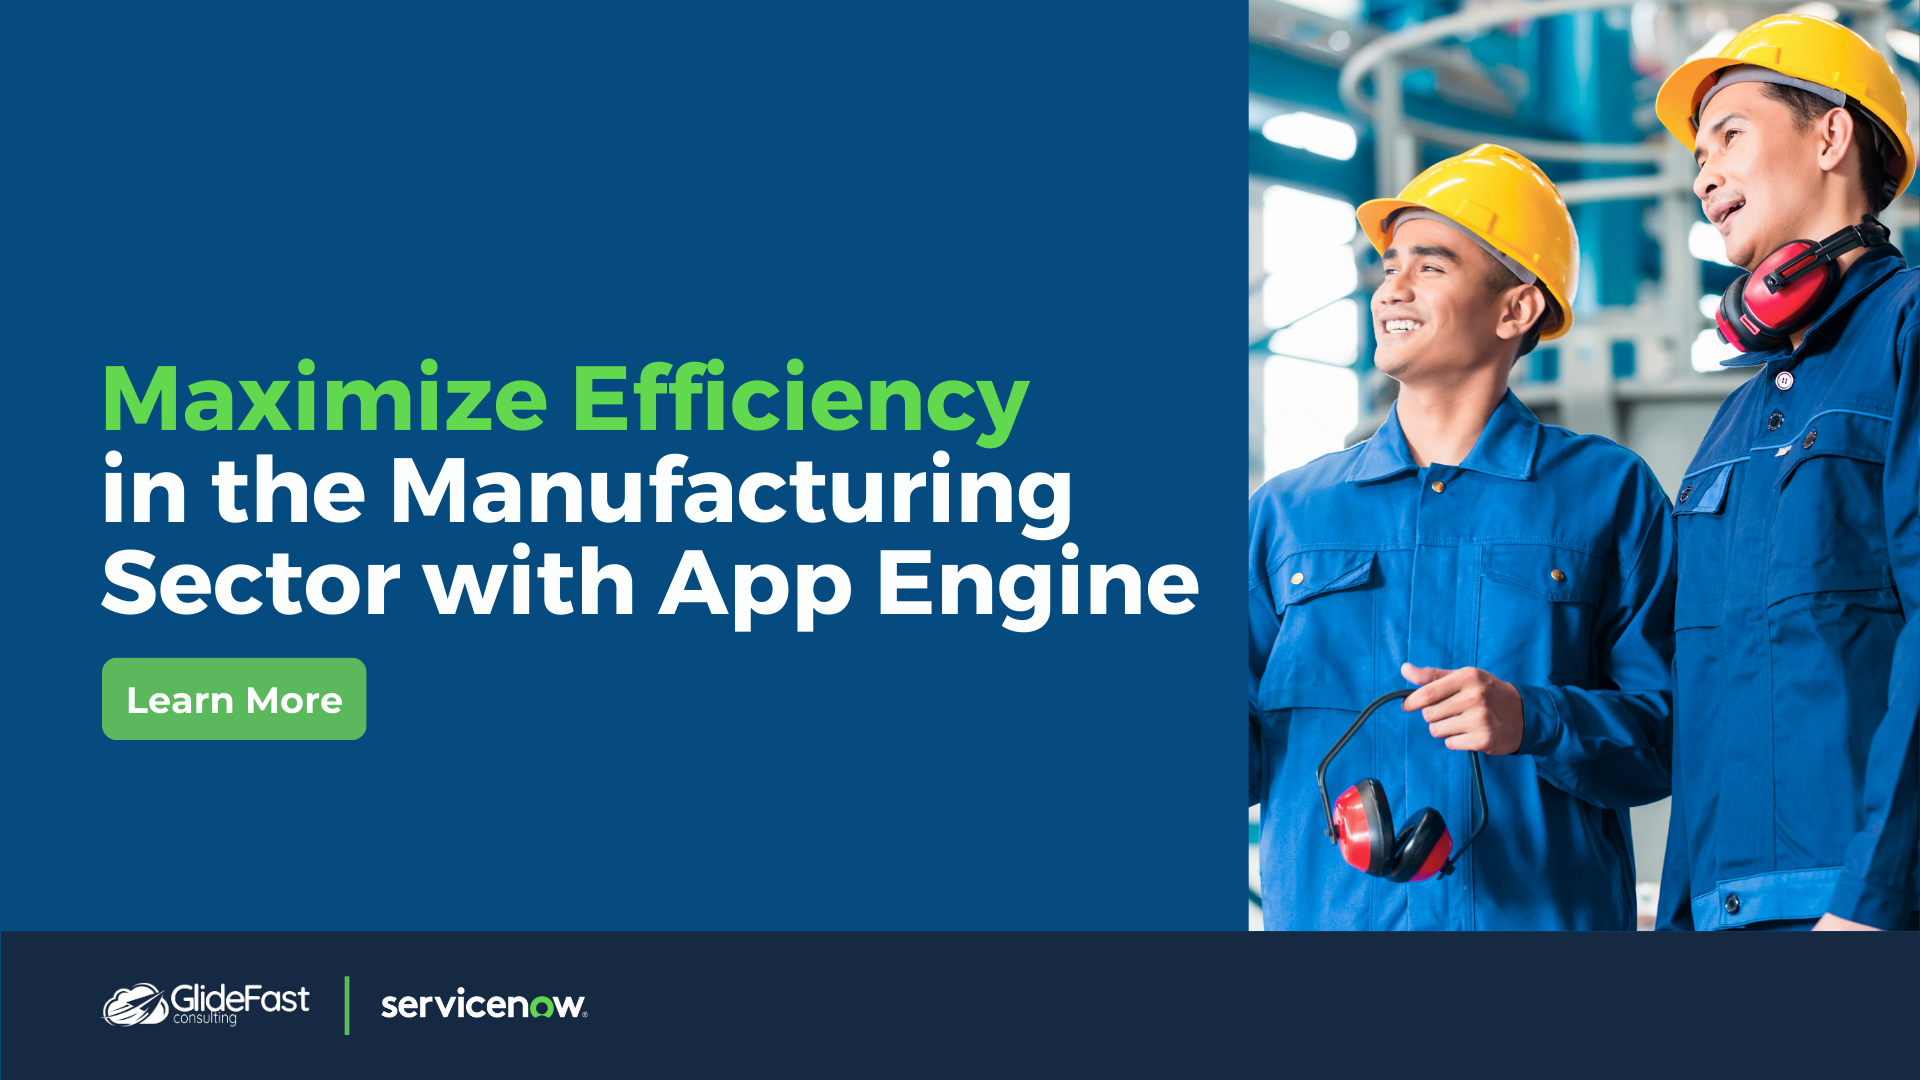 Maximize Efficiency in the Manufacturing Sector with App Engine